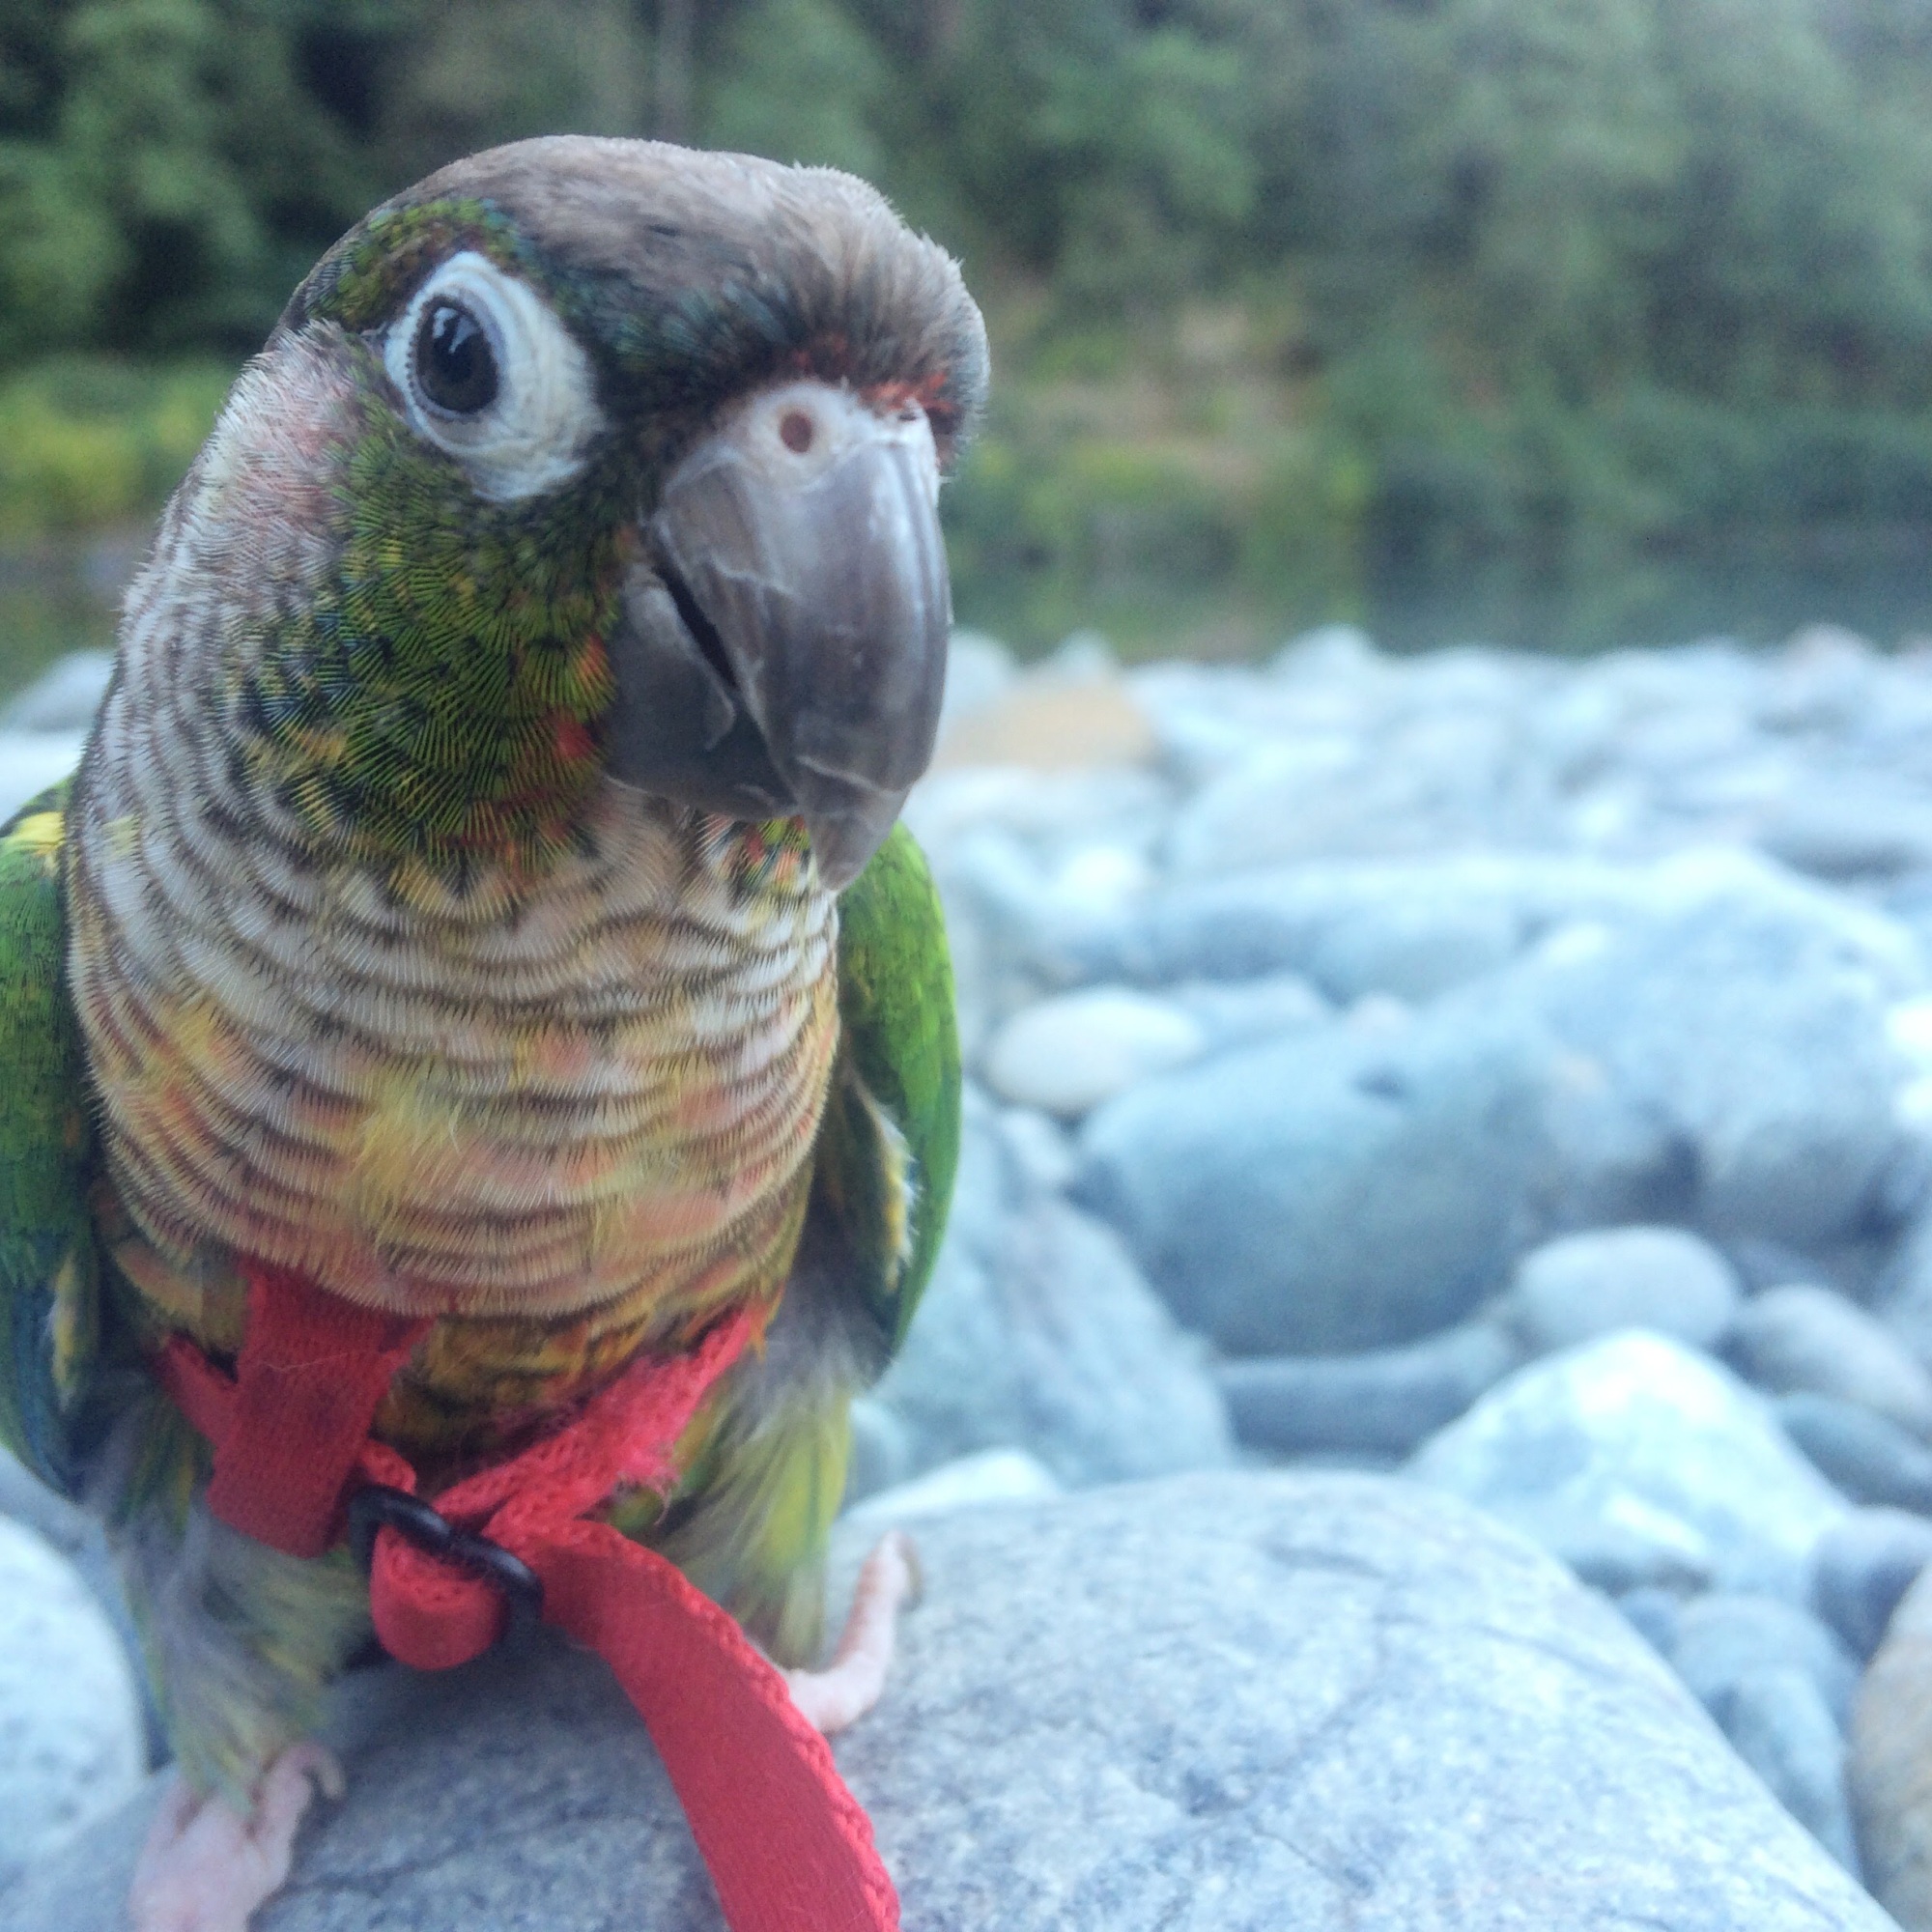 Green Cheek Conure (Parrot) named Coopie, hanging out on the Smith River. He is wearing a harness and sitting on a rock near the river's edge.